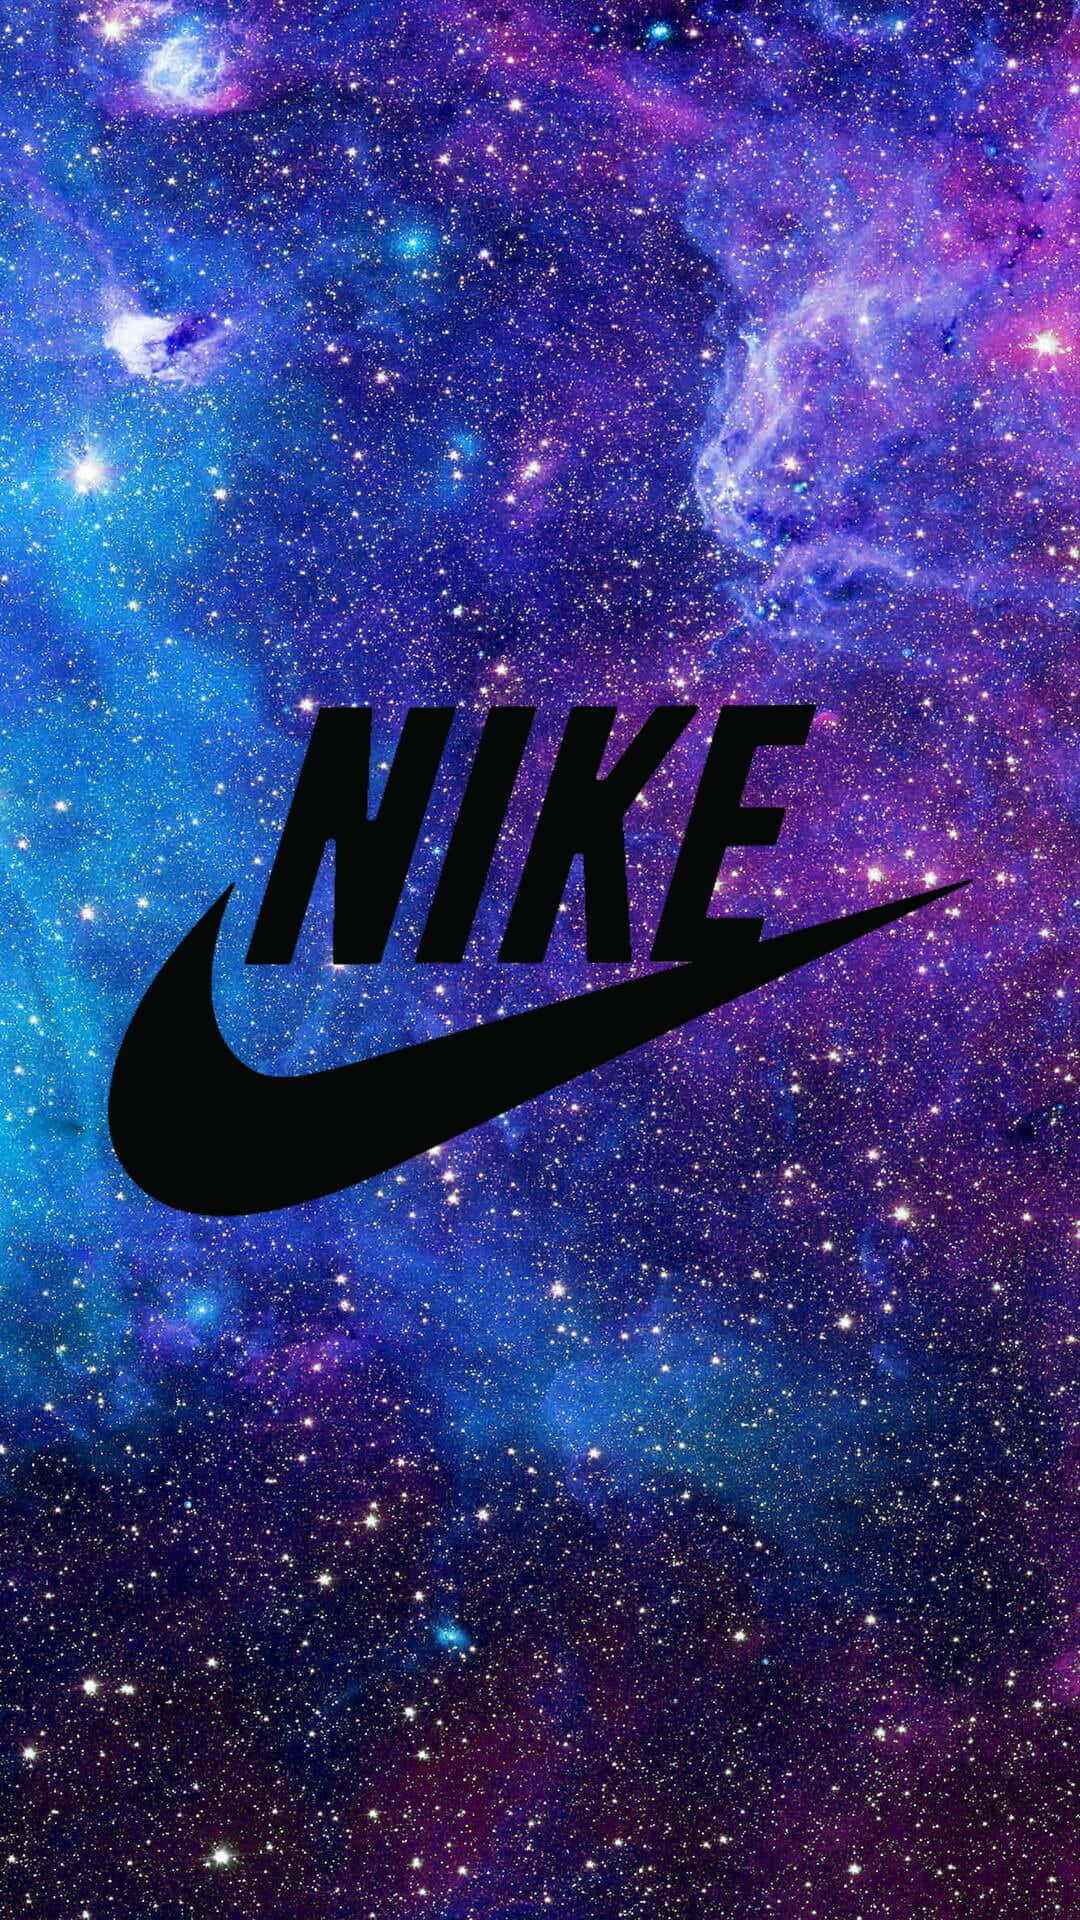 Nike Galaxy Wallpapers - Wallpapers For Your Phone | Wallpapers.com